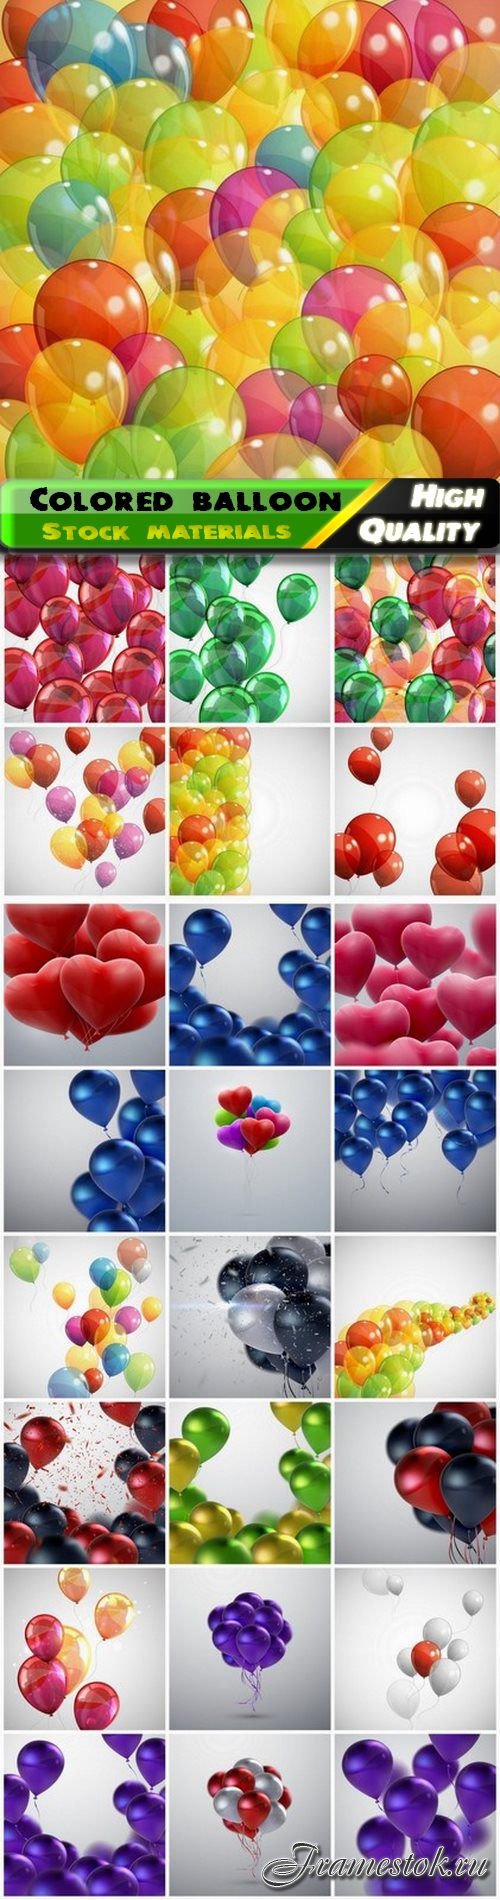 Colored realistic balloon for birthday card decoration 25 Eps